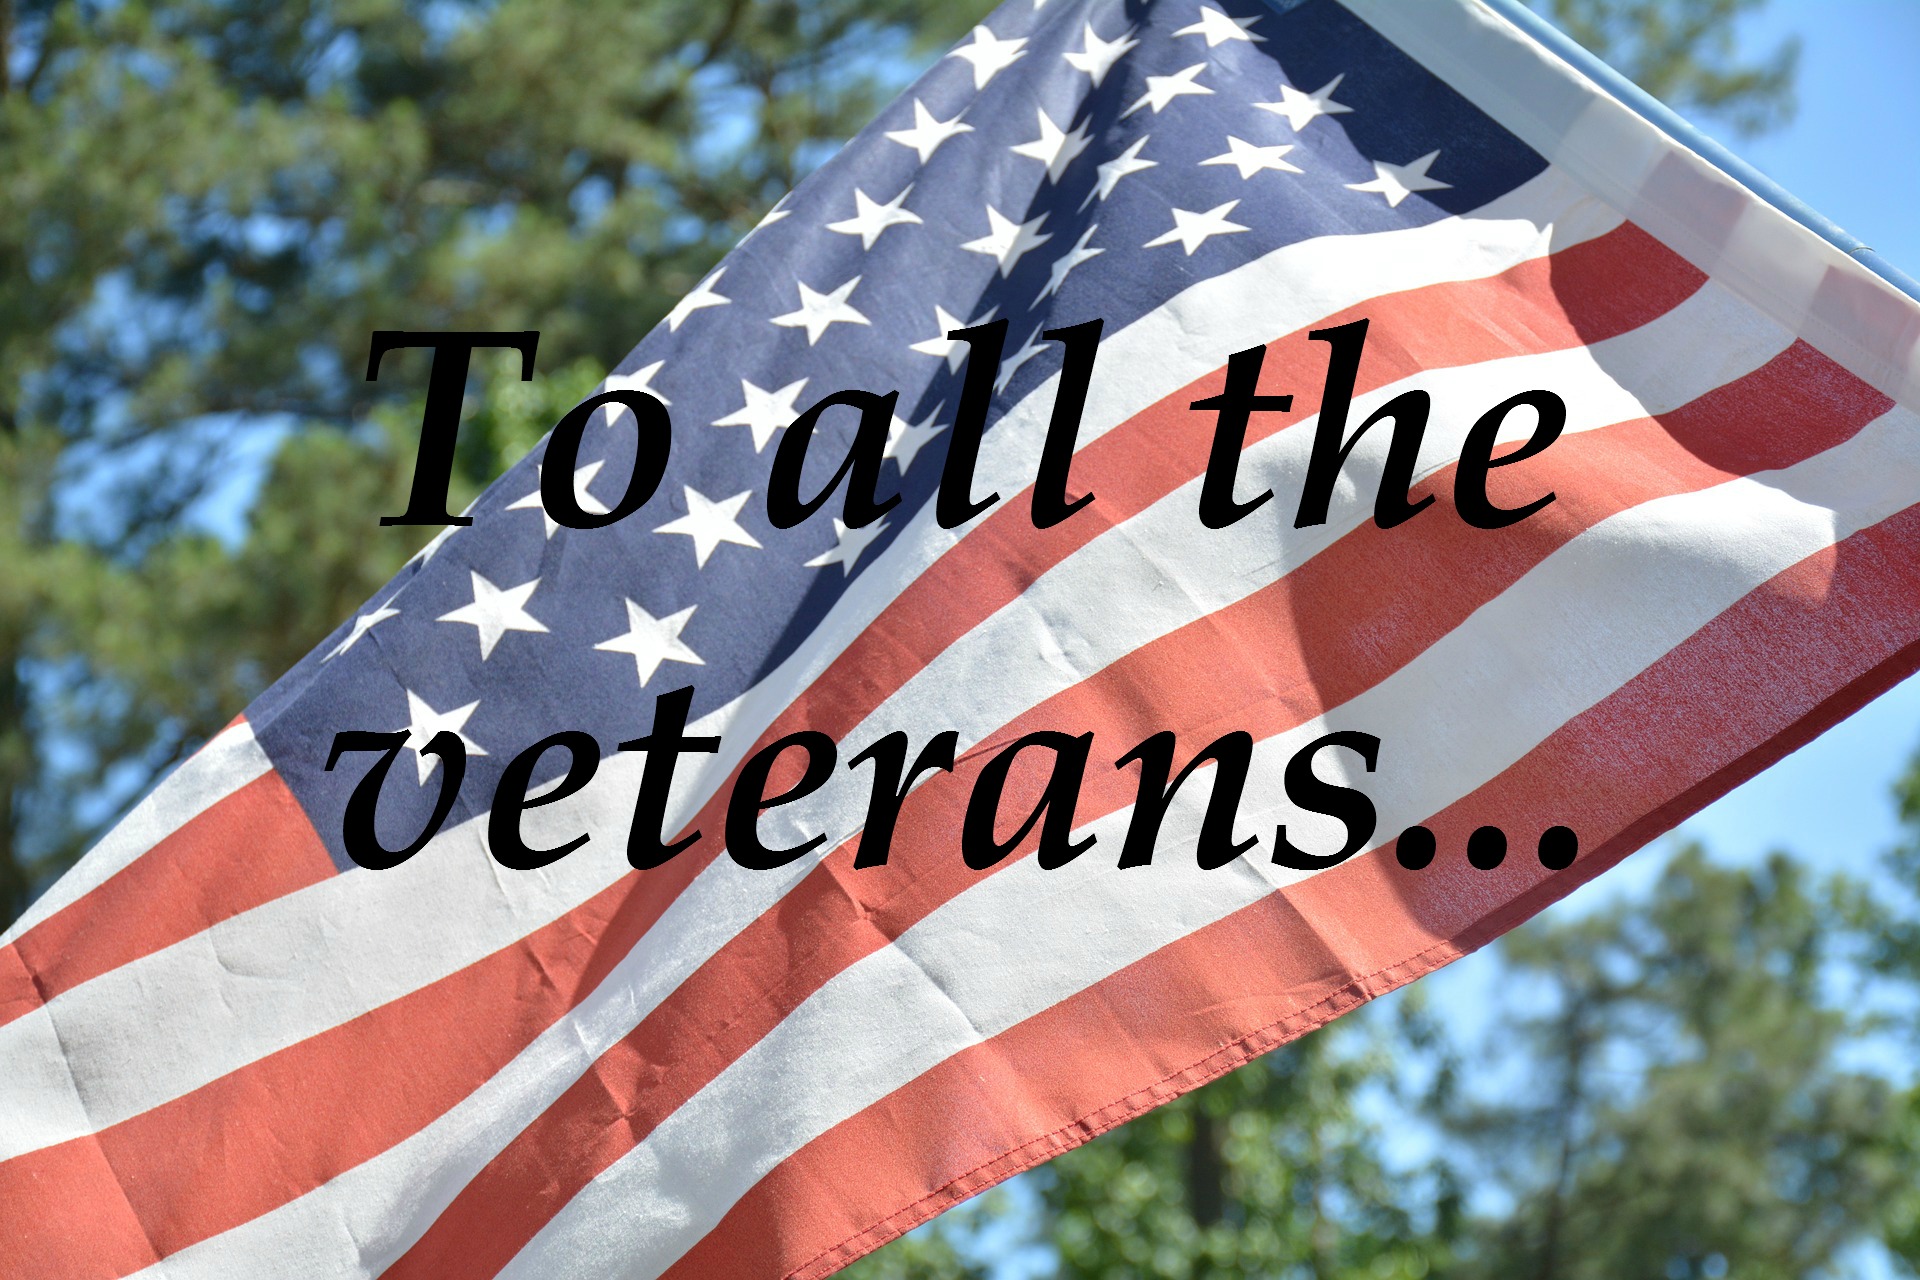 Veteran's Day - Thank you for your service.